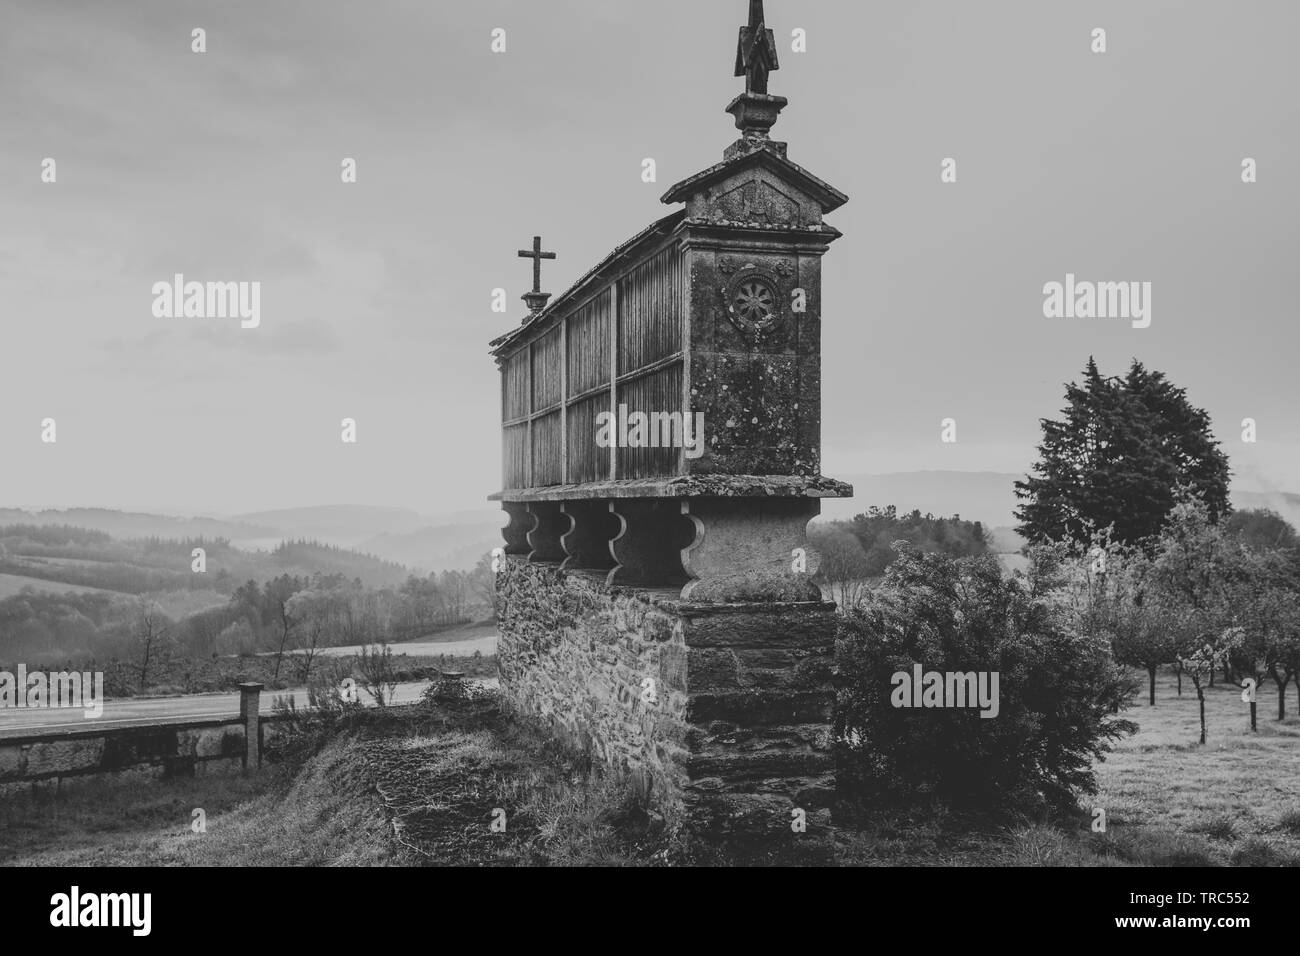 Galician horreo in black and white, at the countryside Stock Photo